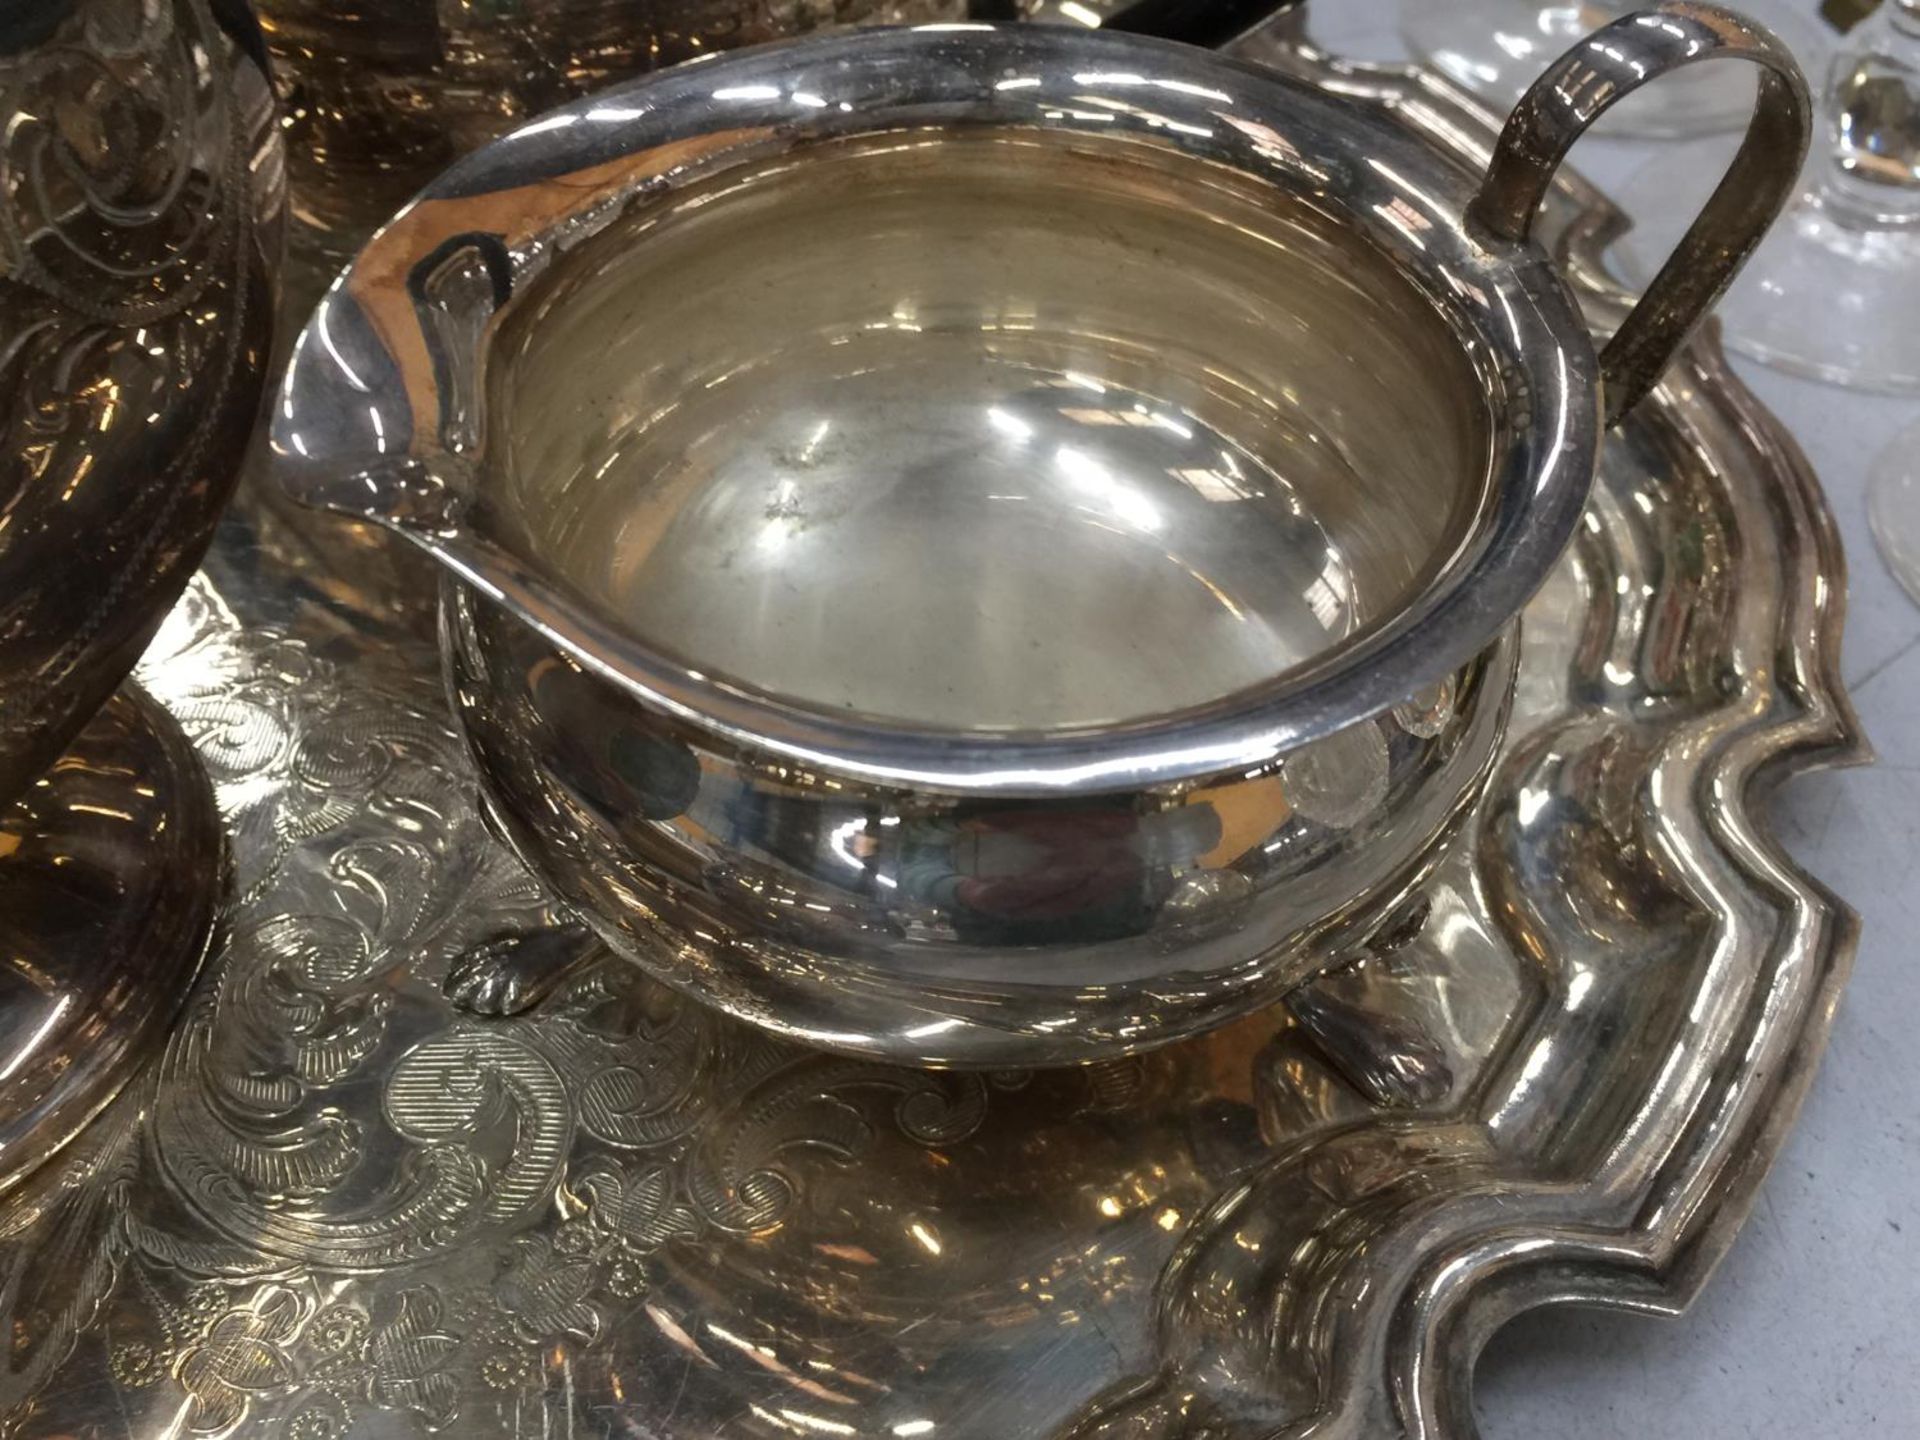 A QUANTITY OF SILVER PLATE TO INCLUDE A TRAY WITH A TEAPOT, SUGAR BOWL, CREAM JUG, ETC - Image 3 of 6